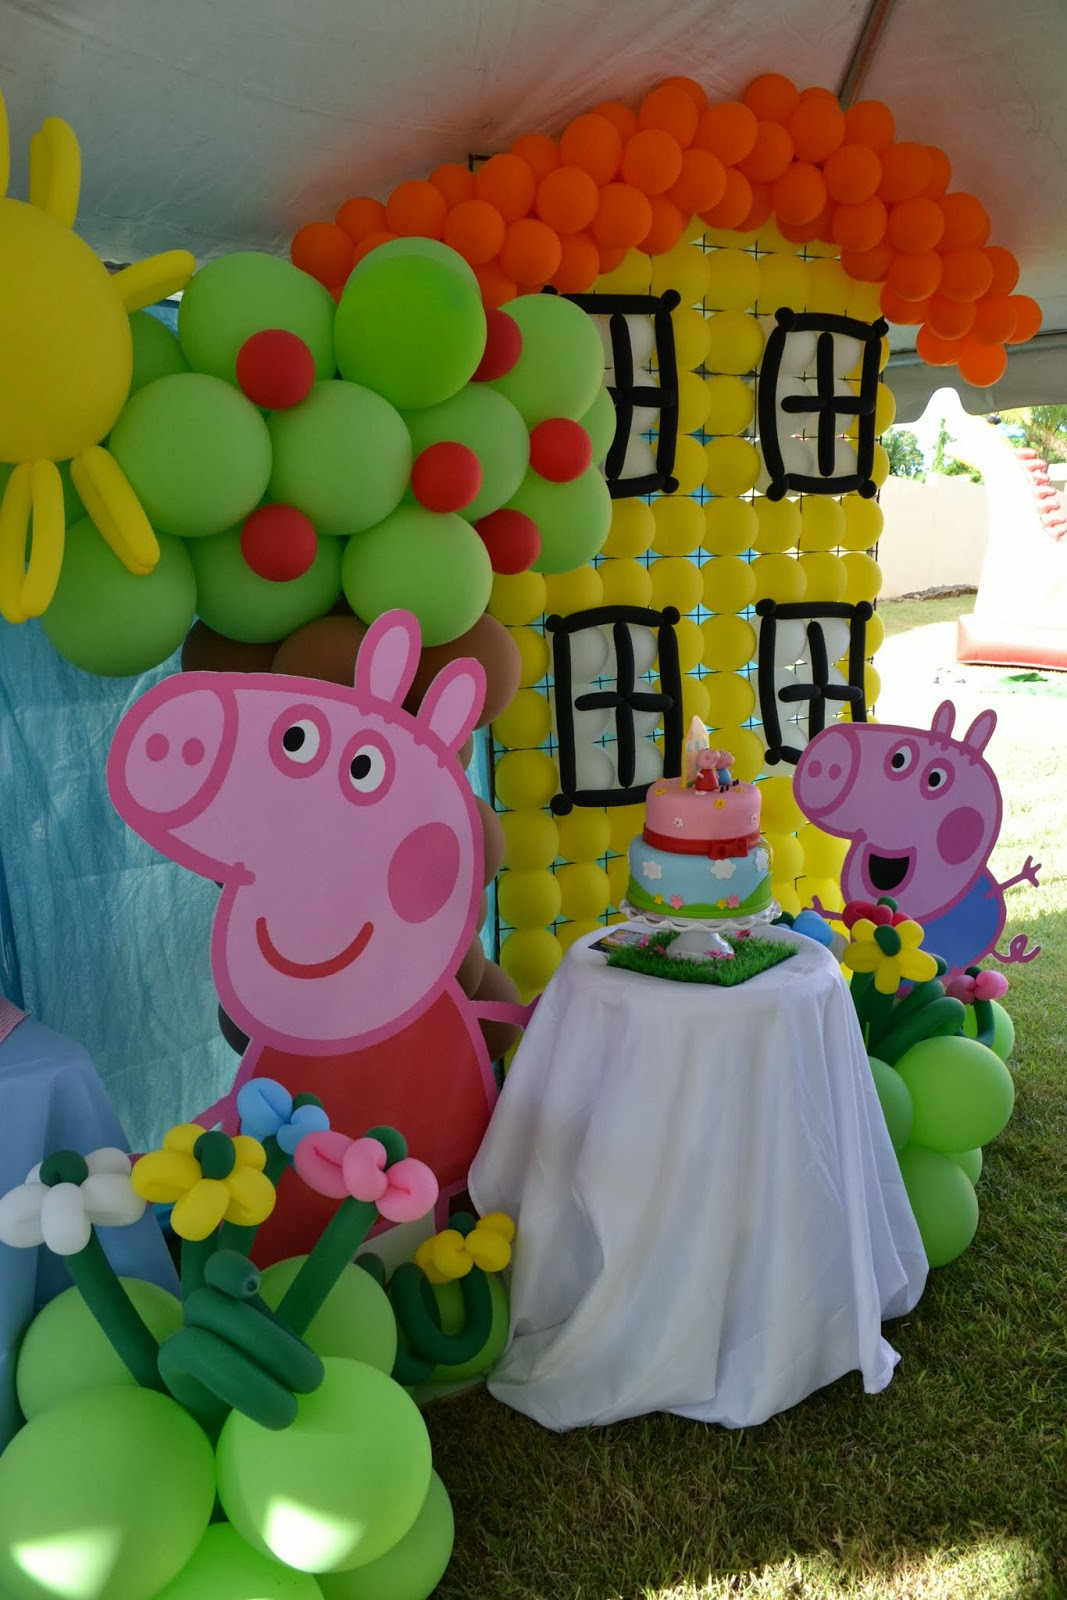 Peppa Pig Decorations Birthday
 Partylicious Events PR Peppa Pig Party